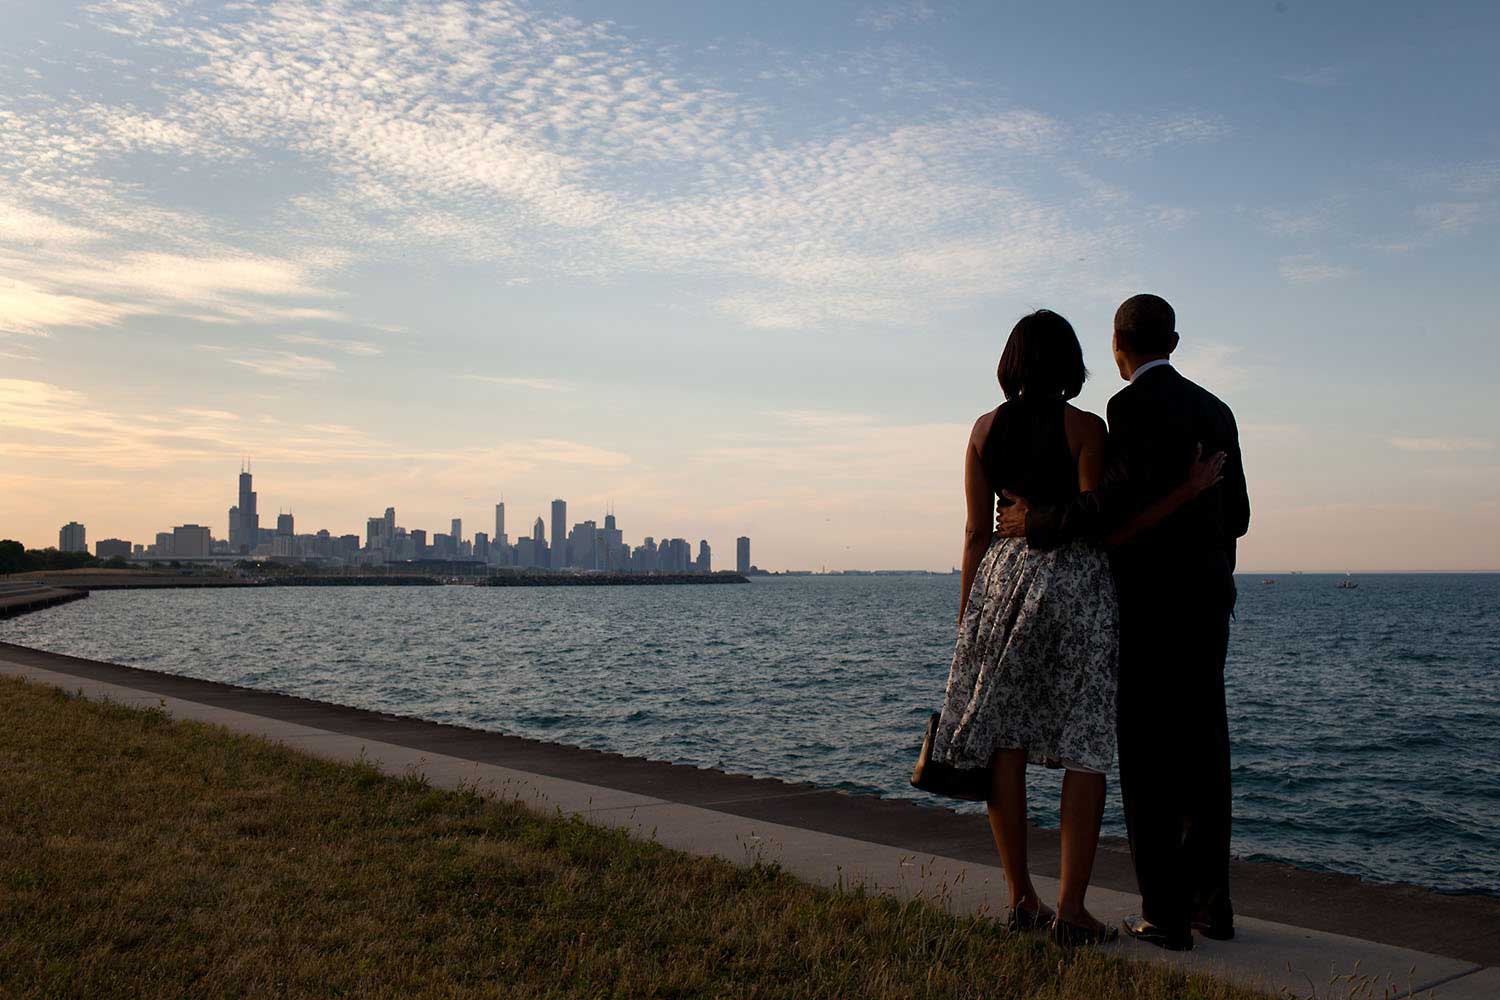 The President and First Lady look out at the city skyline and Lake Michigan after arriving at the Burnham Park landing zone in Chicago, Ill., June 15, 2012.